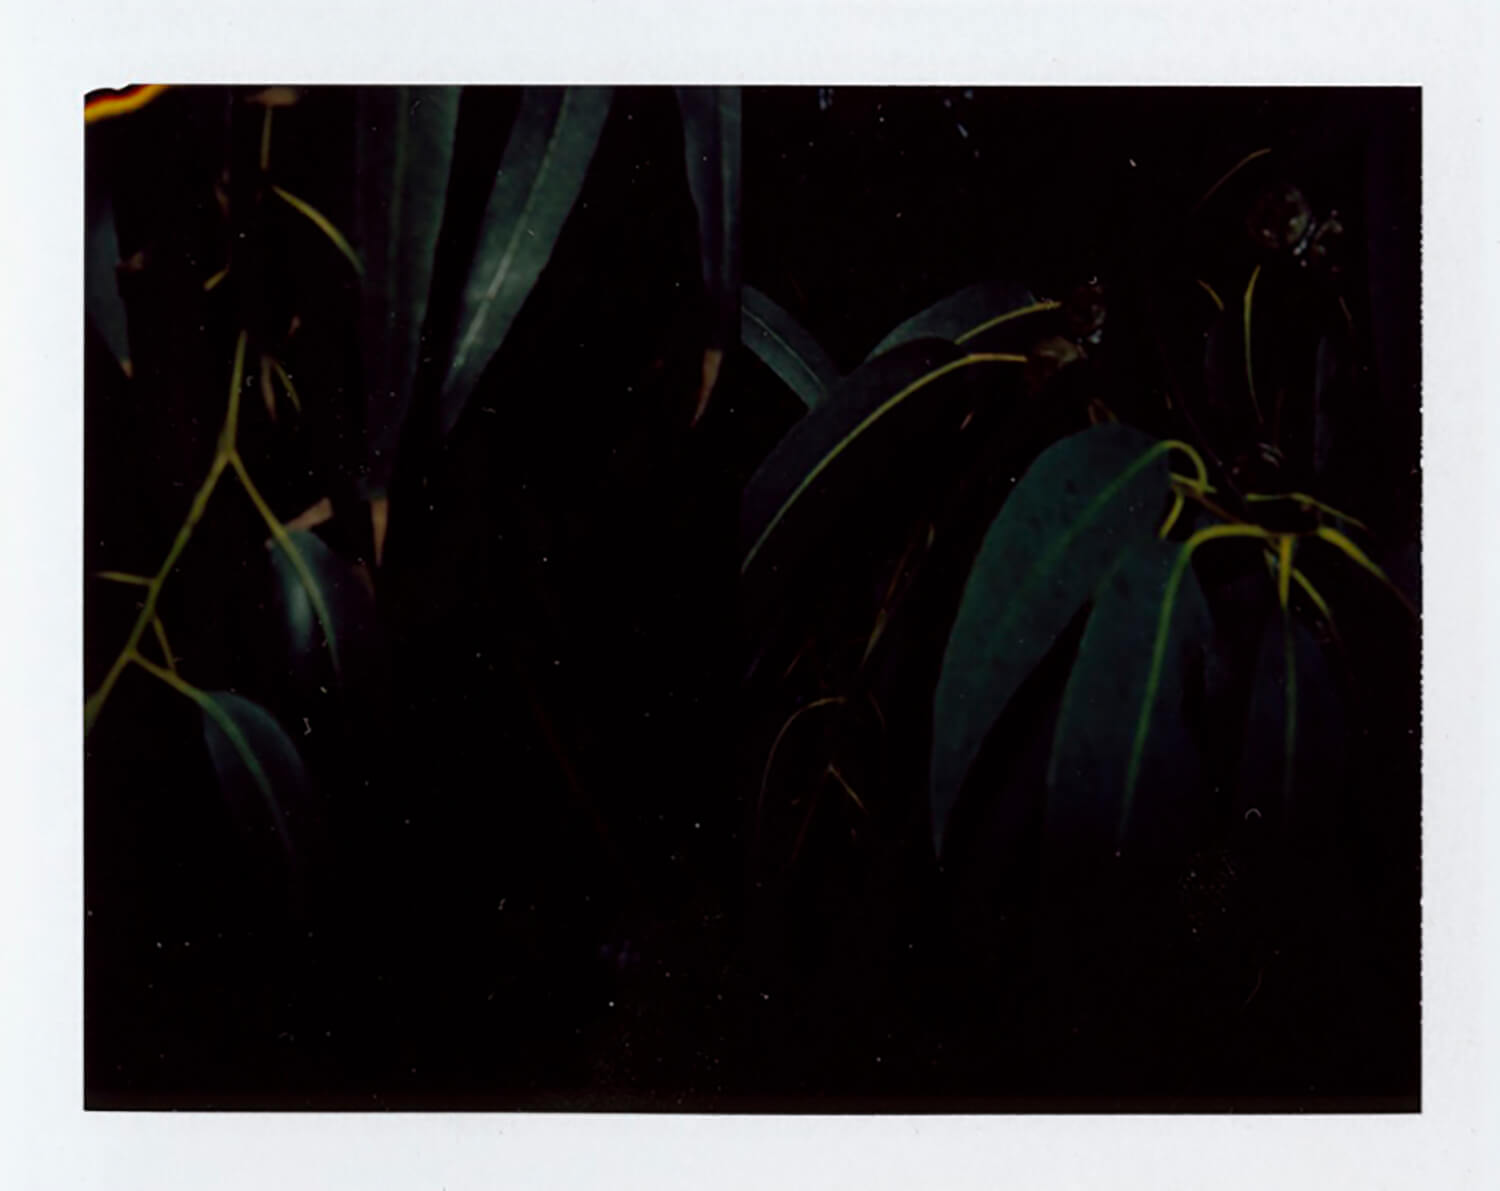  I.D.082, The Polaroid Revolutionary Workers, 2013, Polaroid Picture, 107mm x 86mm 